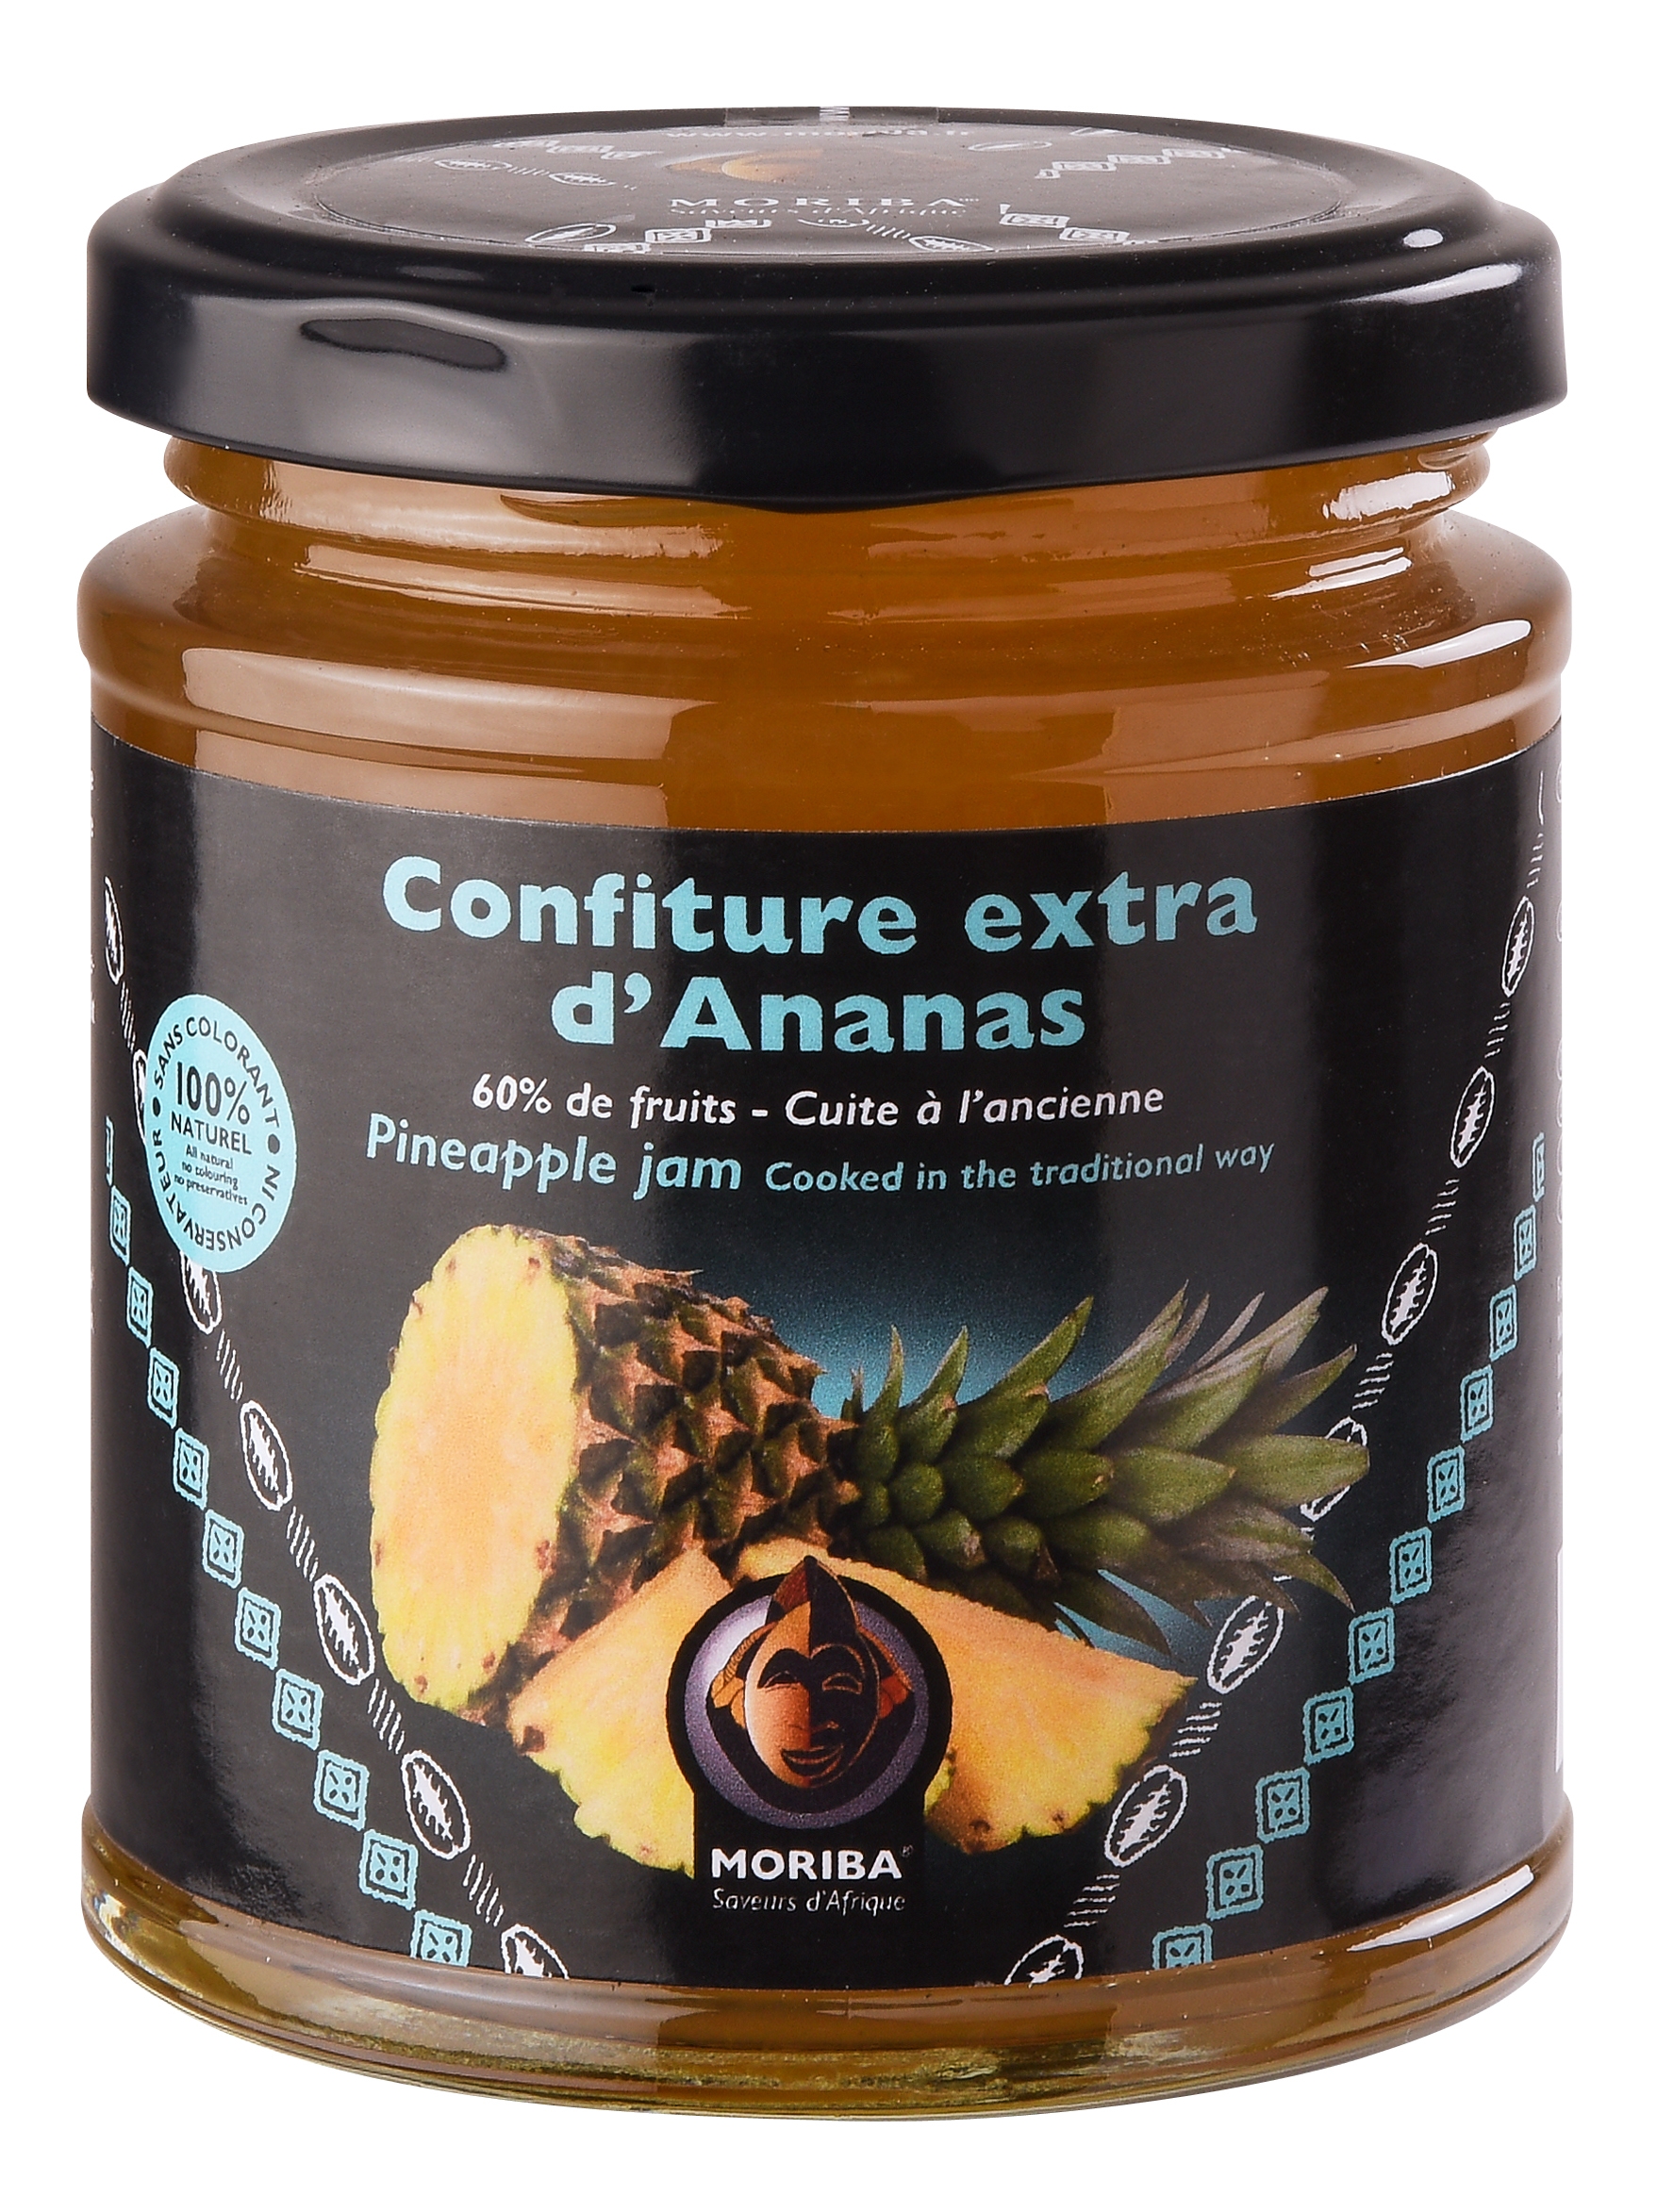 Confiture Extra d'Ananas - format : 250g